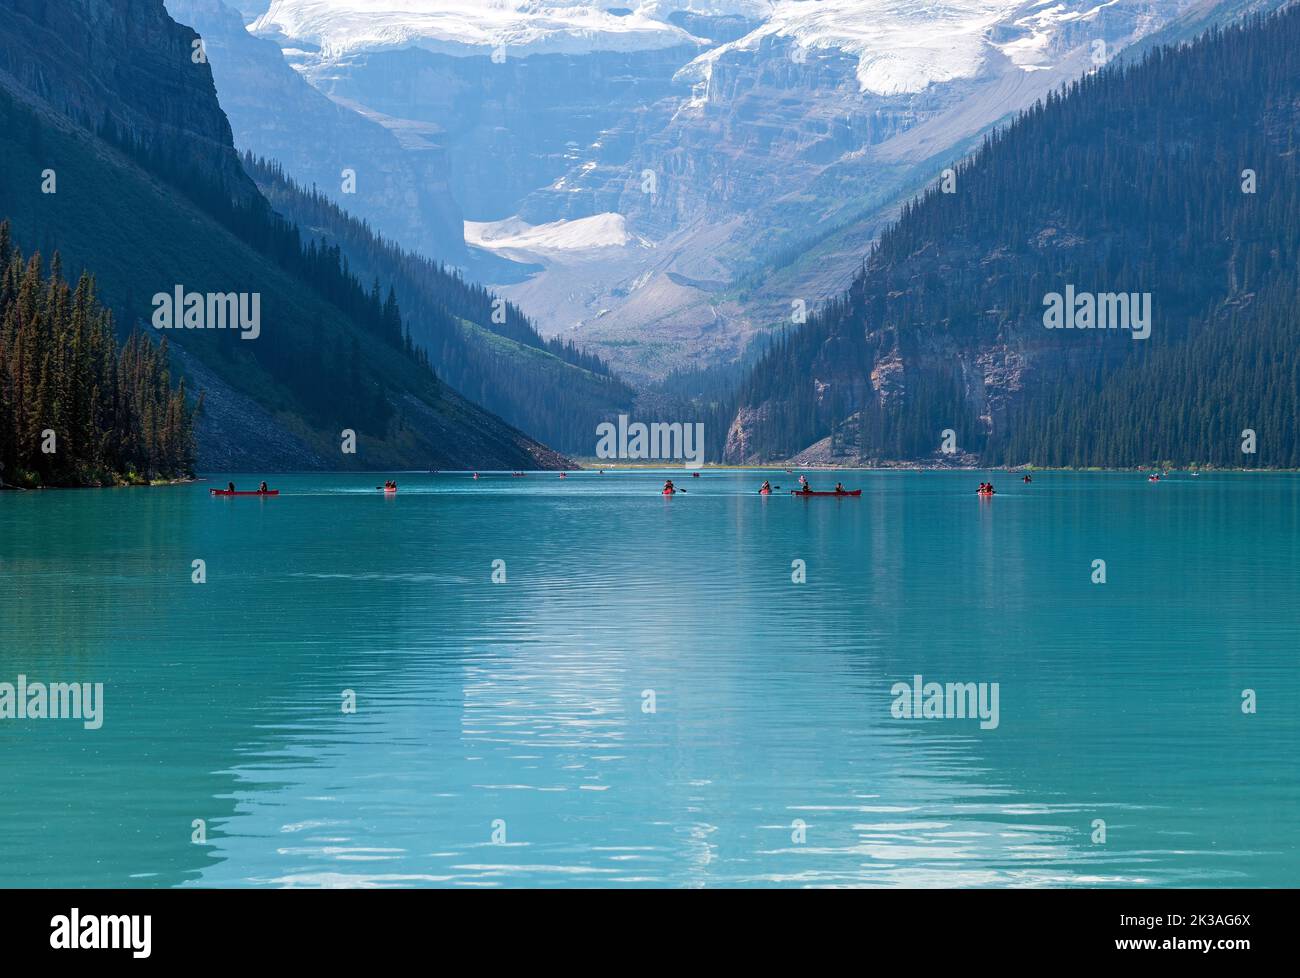 Lake Louise with people kayaking and Victoria Glacier reflection, Banff national park, Alberta, Canada. Stock Photo